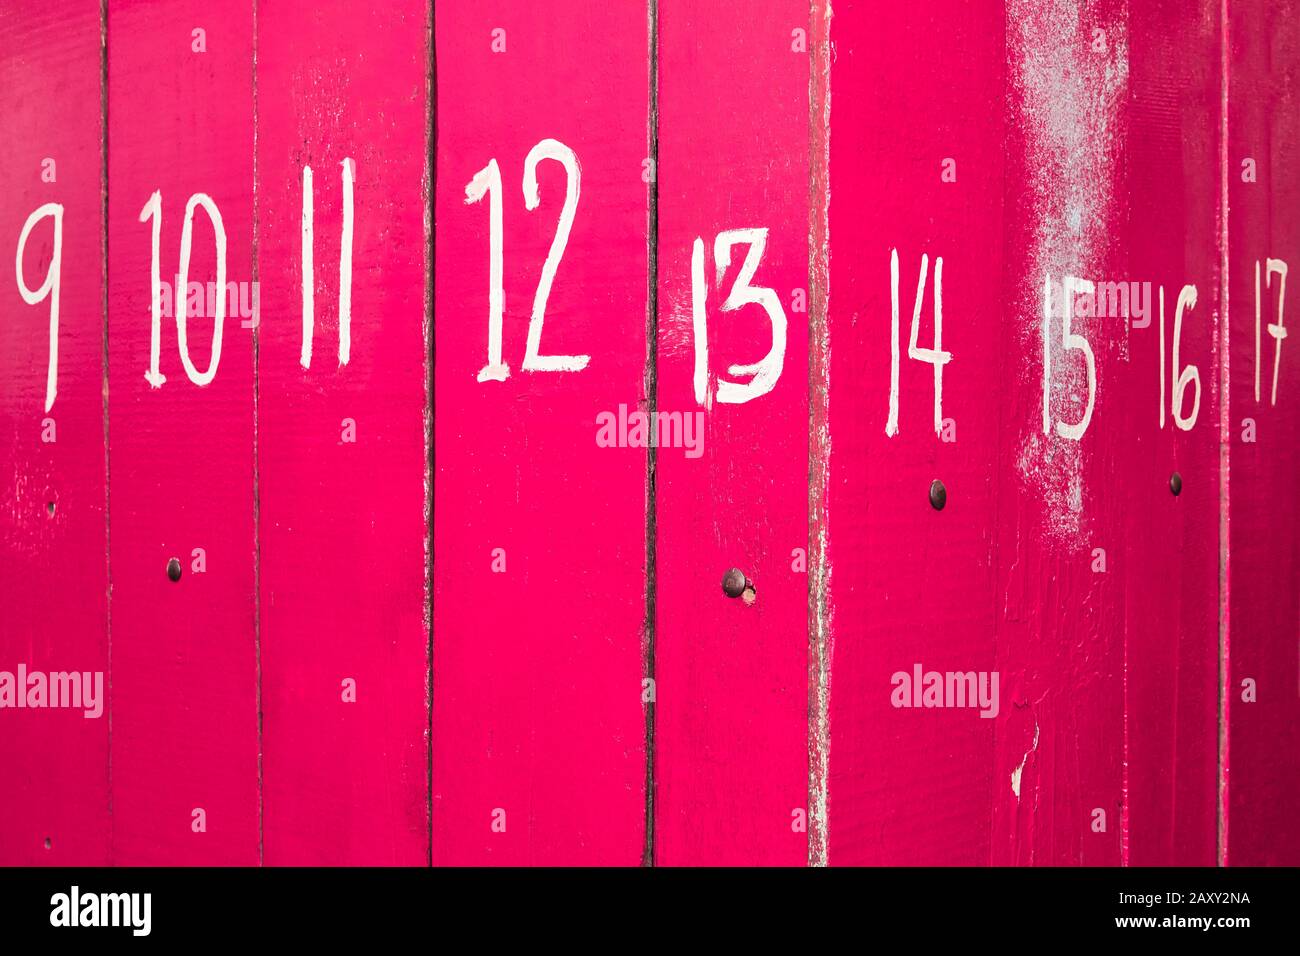 The entrance of a shop is closed with pink painted wooden panels, which are marked with big white numbers. It is often seen in the Philippines, Asia. Stock Photo